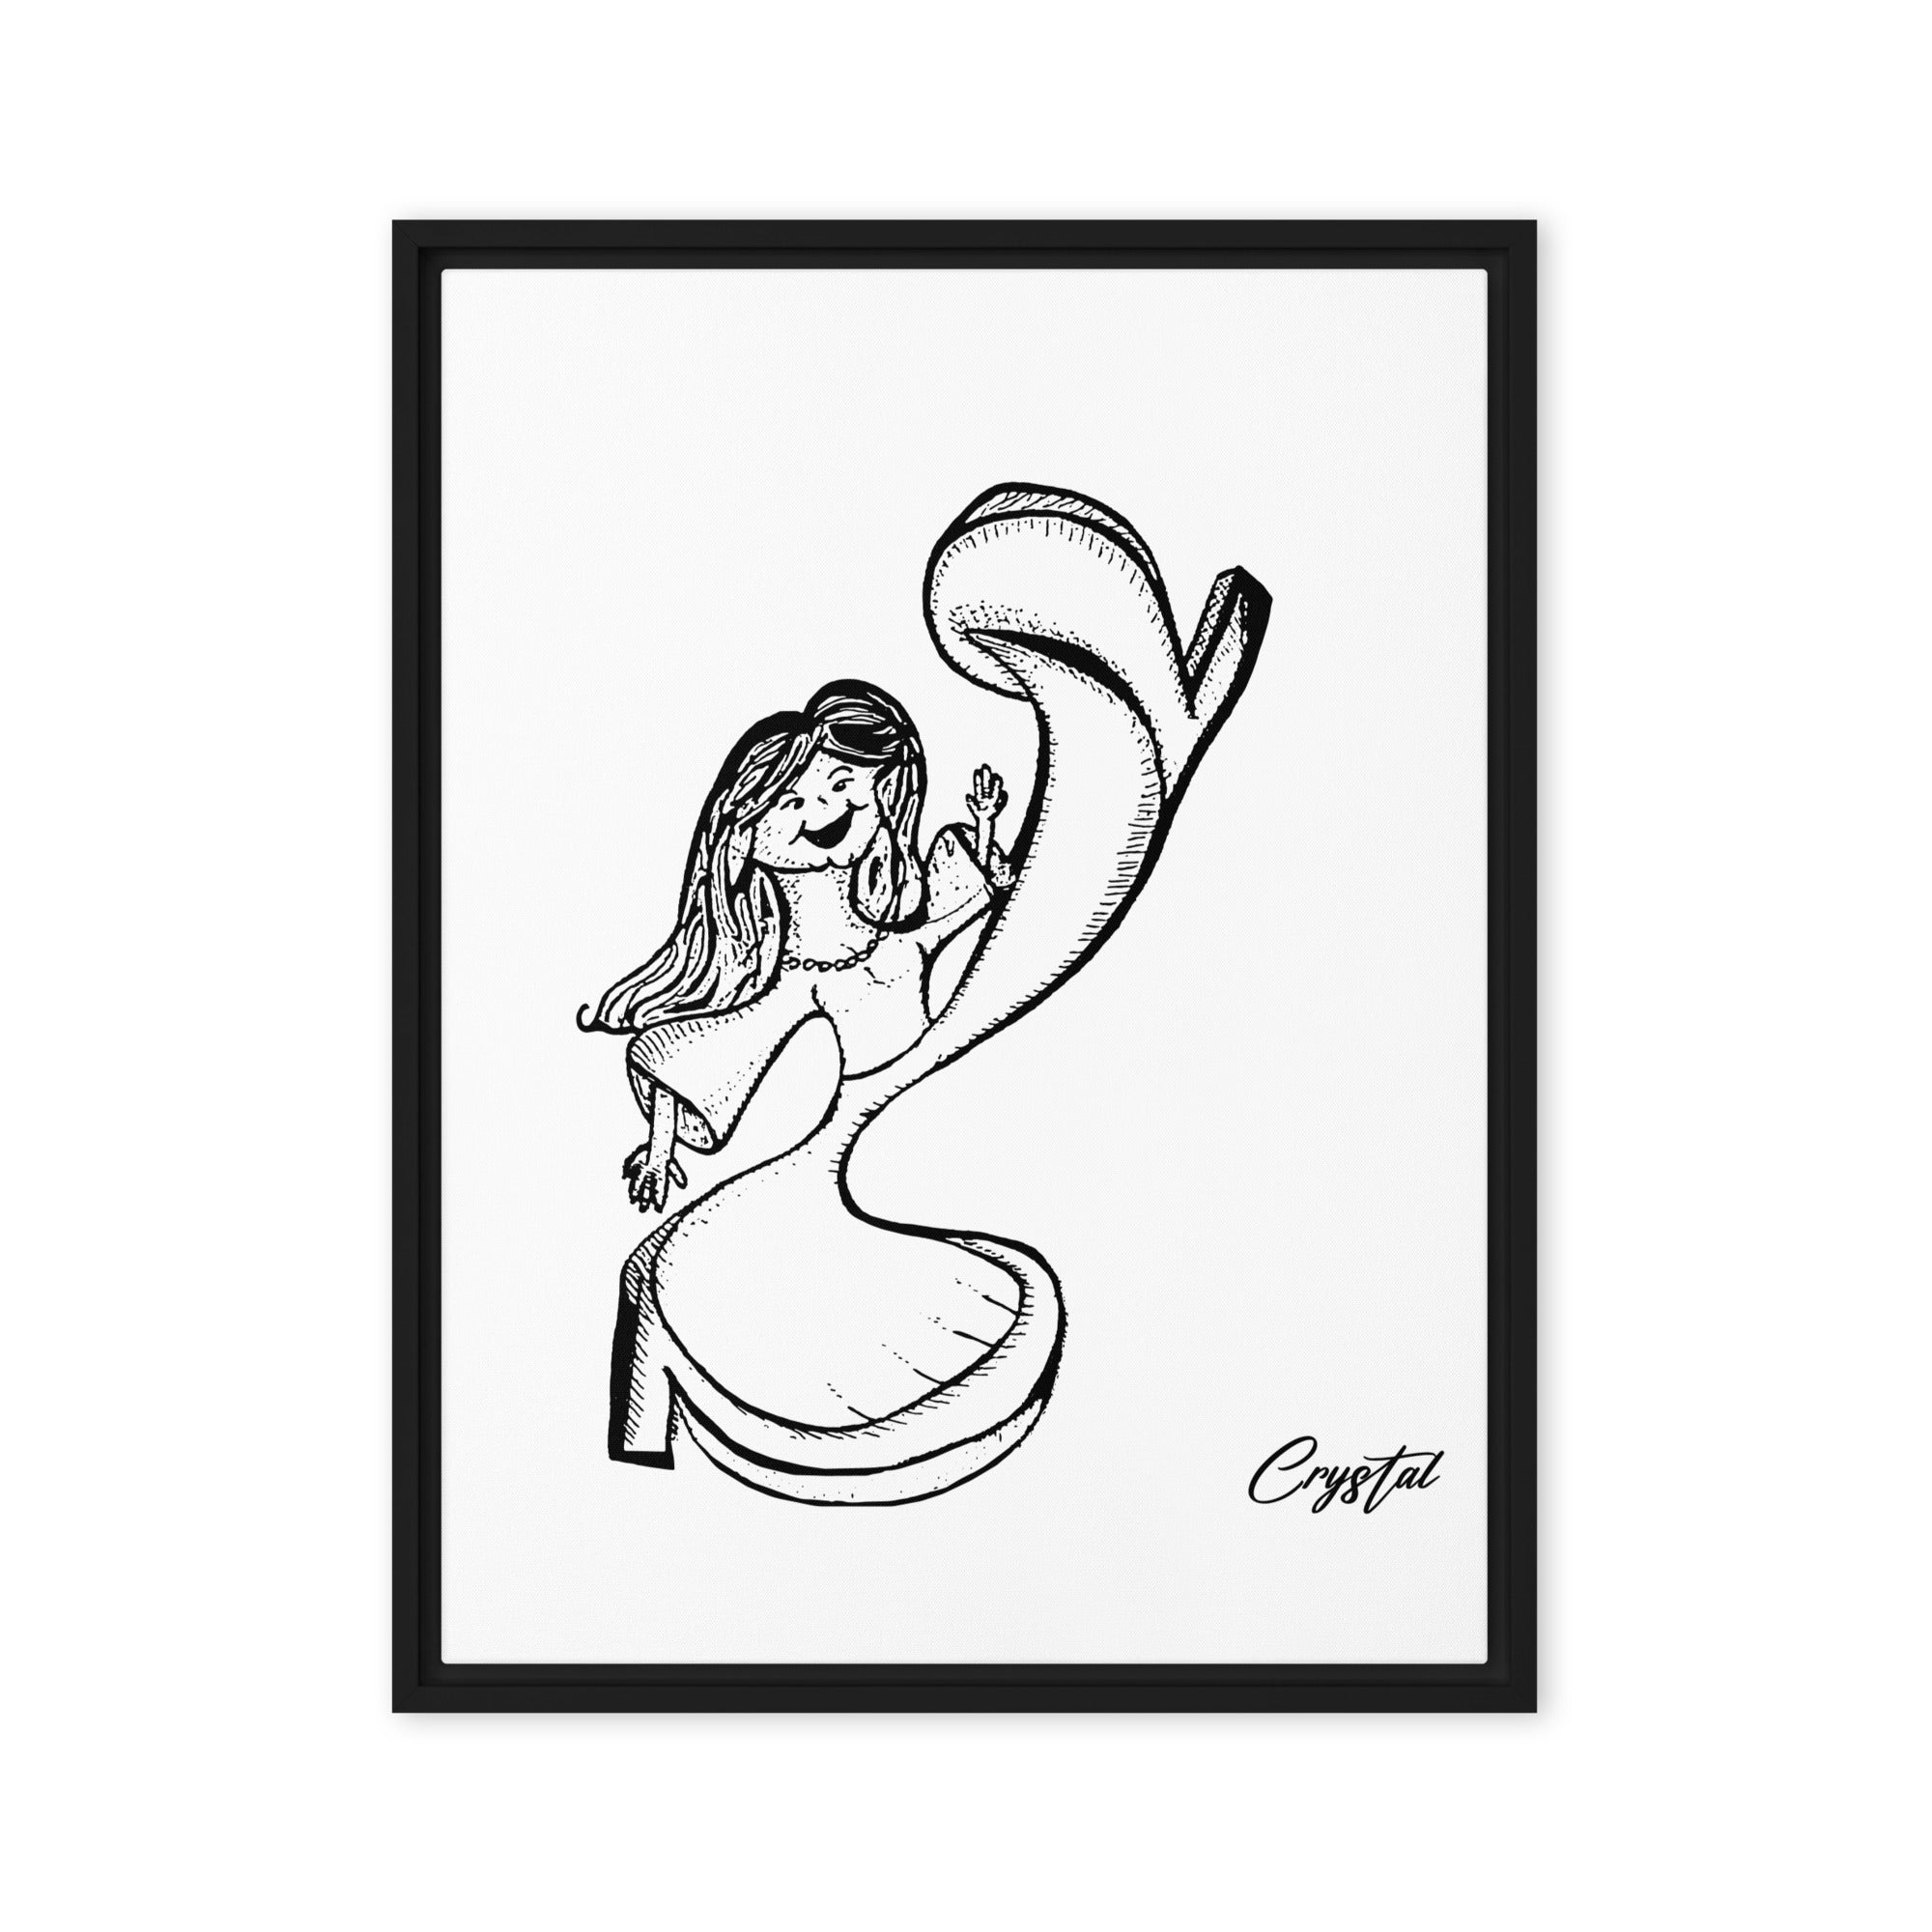 Abstract Drawing of Happy Girl or Woman Dancing and Kicking - Cute & Creepy "Stay Weird" Cartoon Illustration Framed canvas